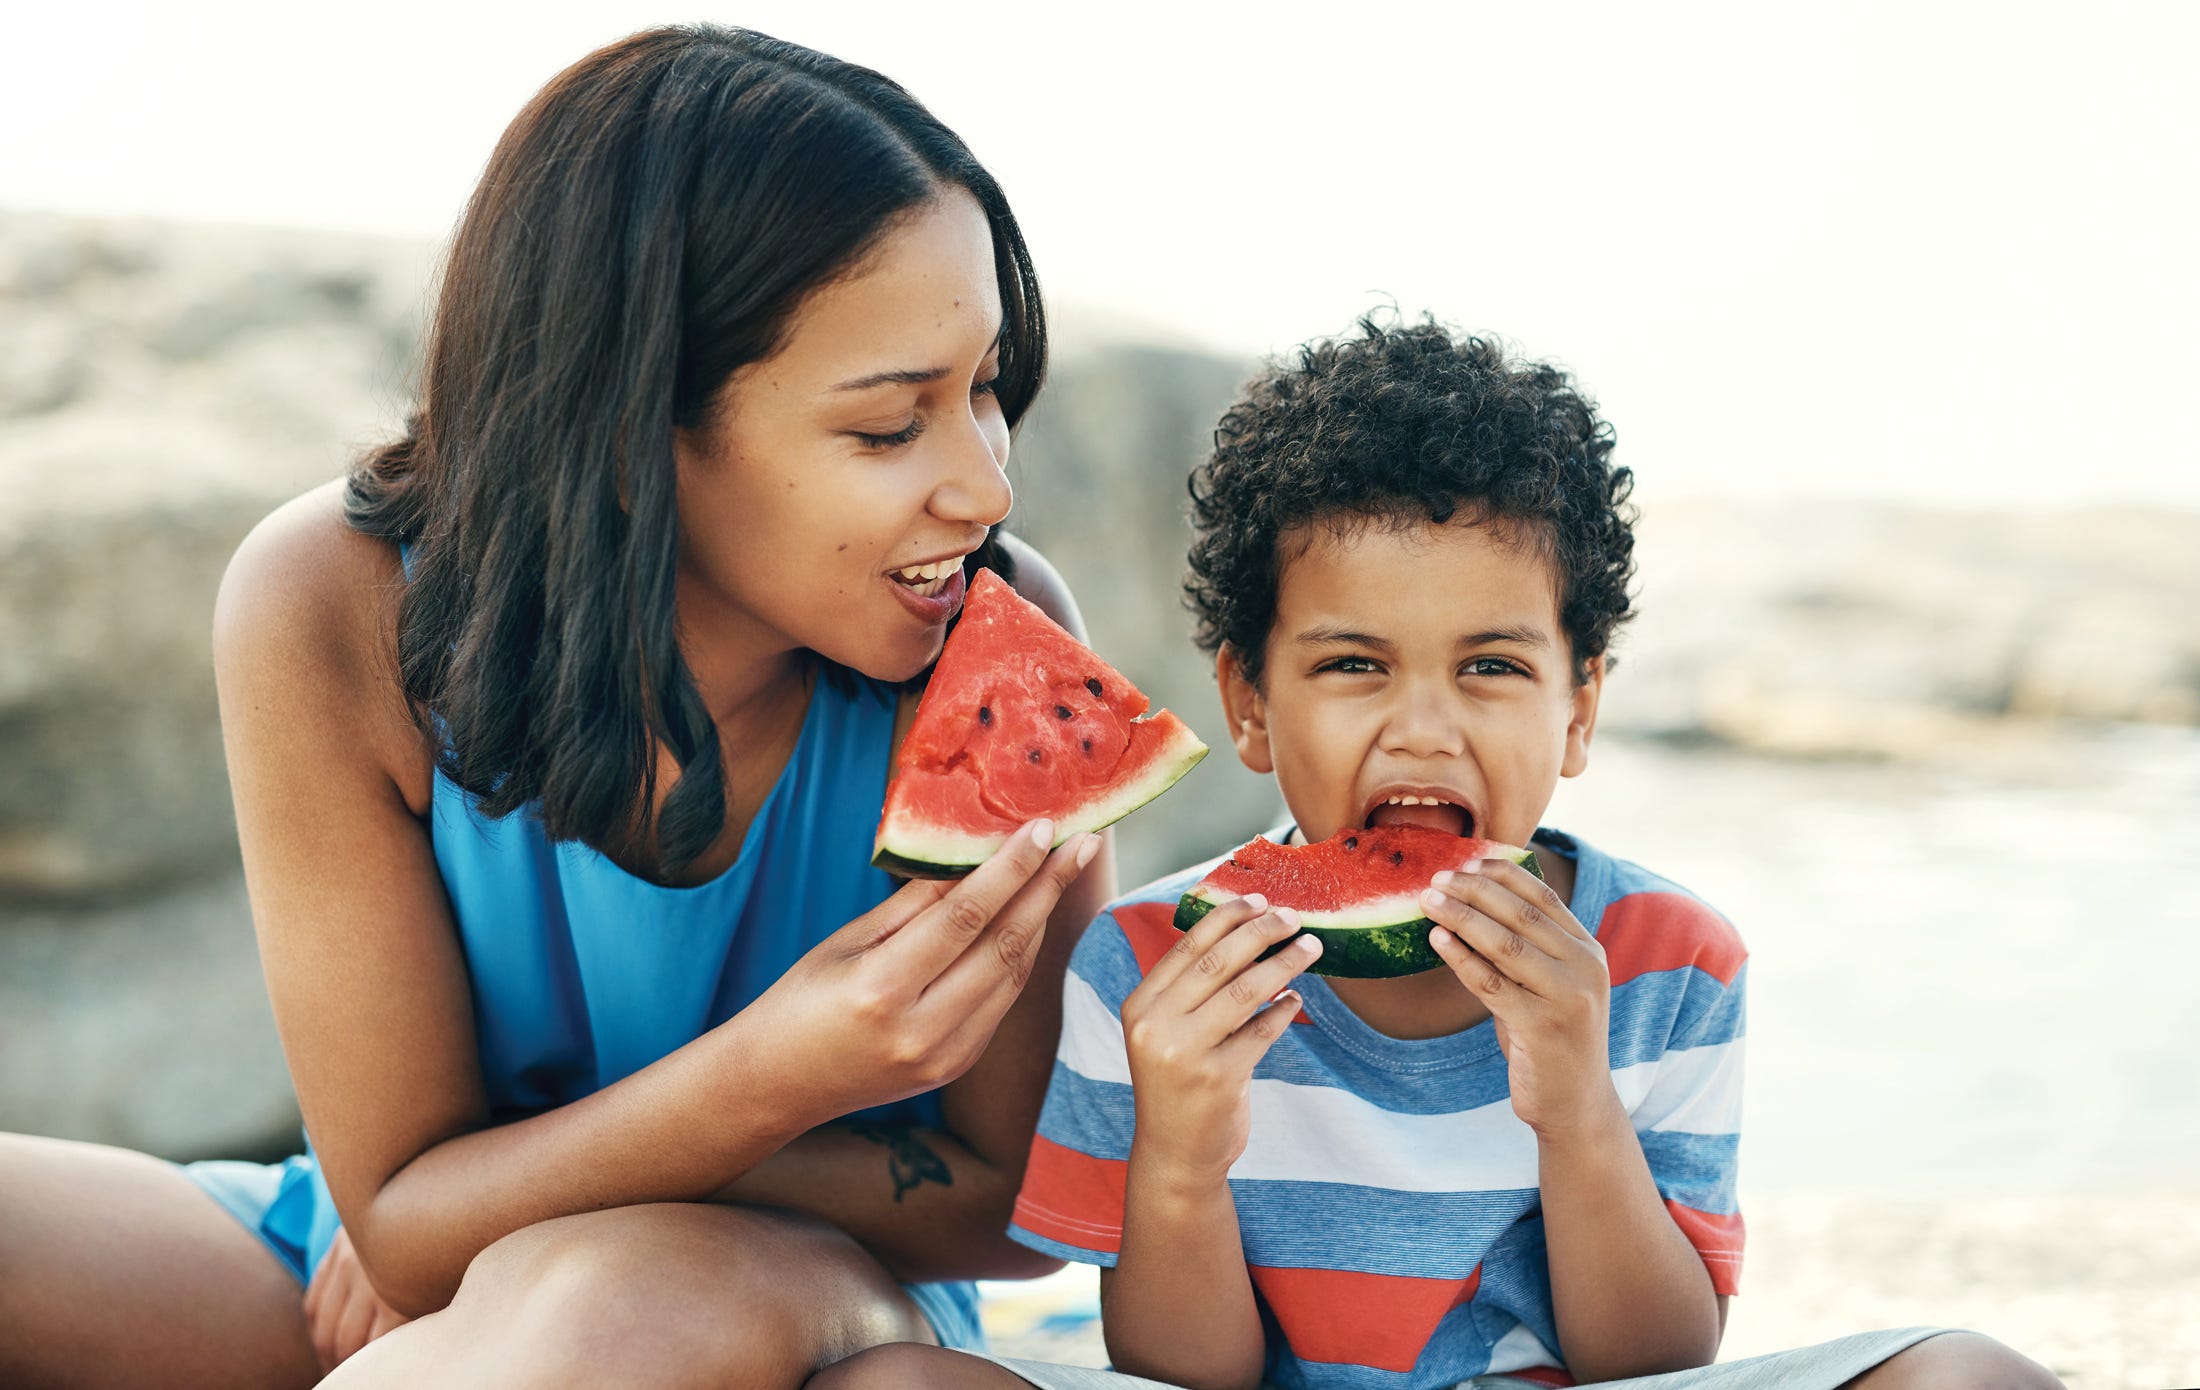 Take time to plan nutritious meals and snacks for your family, even if you're on the go.